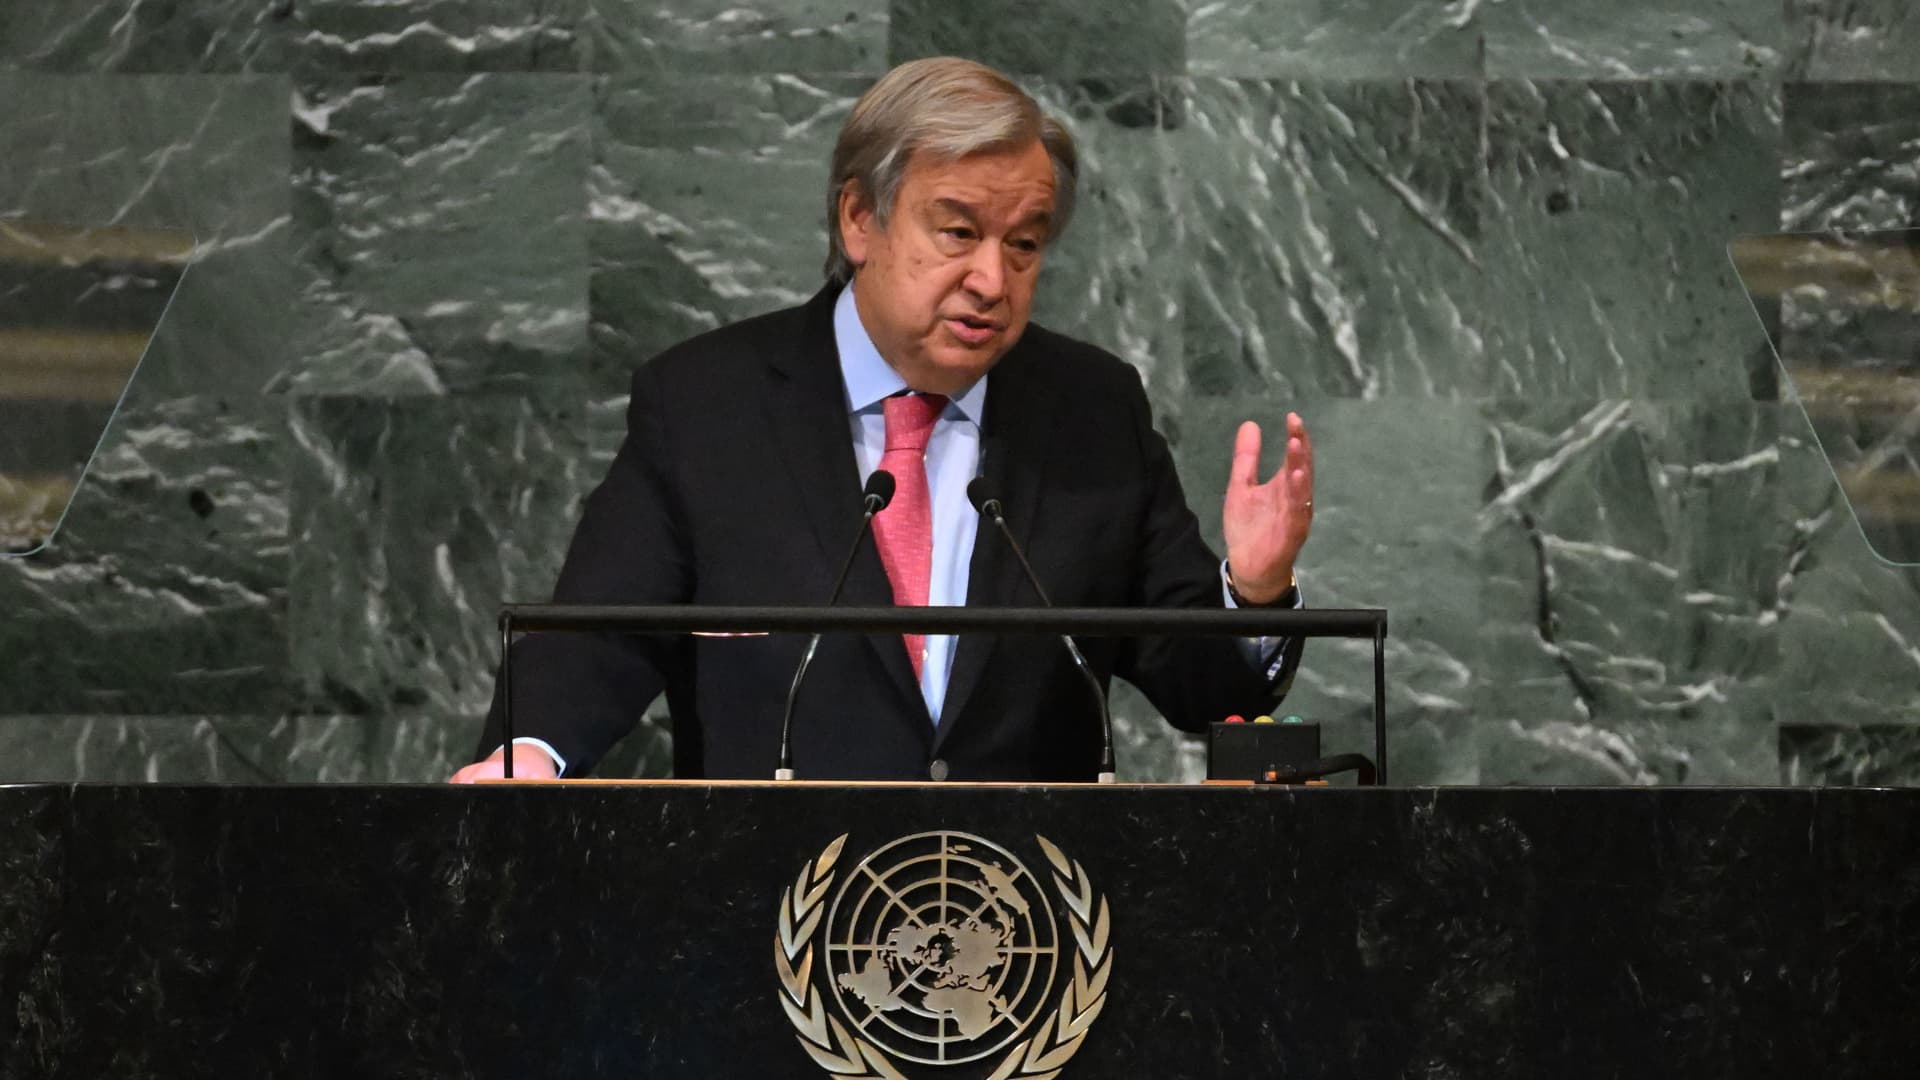 United Nations Secretary-General Antonio Guterres addresses the 77th session of the United Nations General Assembly at UN headquarters in New York City on September 20, 2022.